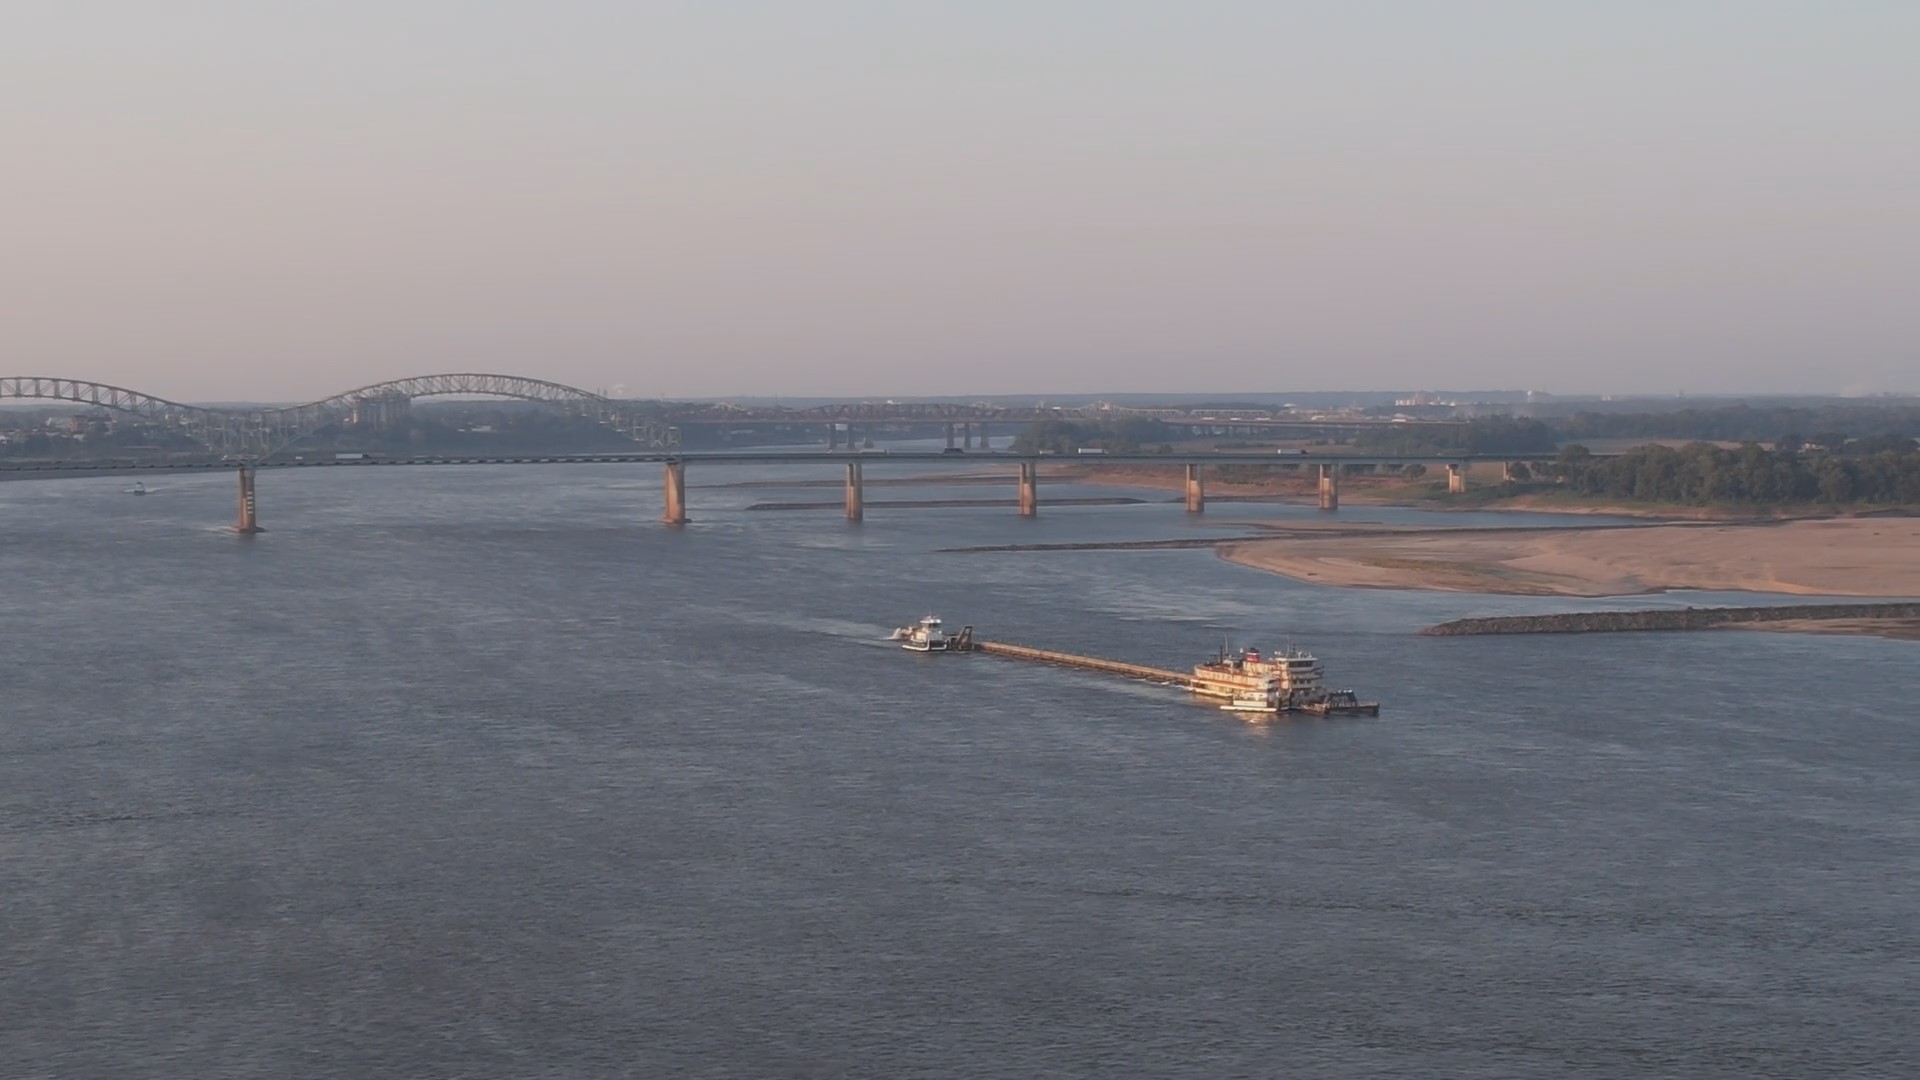 The Mississippi River is approaching a record low level for the second year in a row, posing issues for barge traffic and commerce on the river.